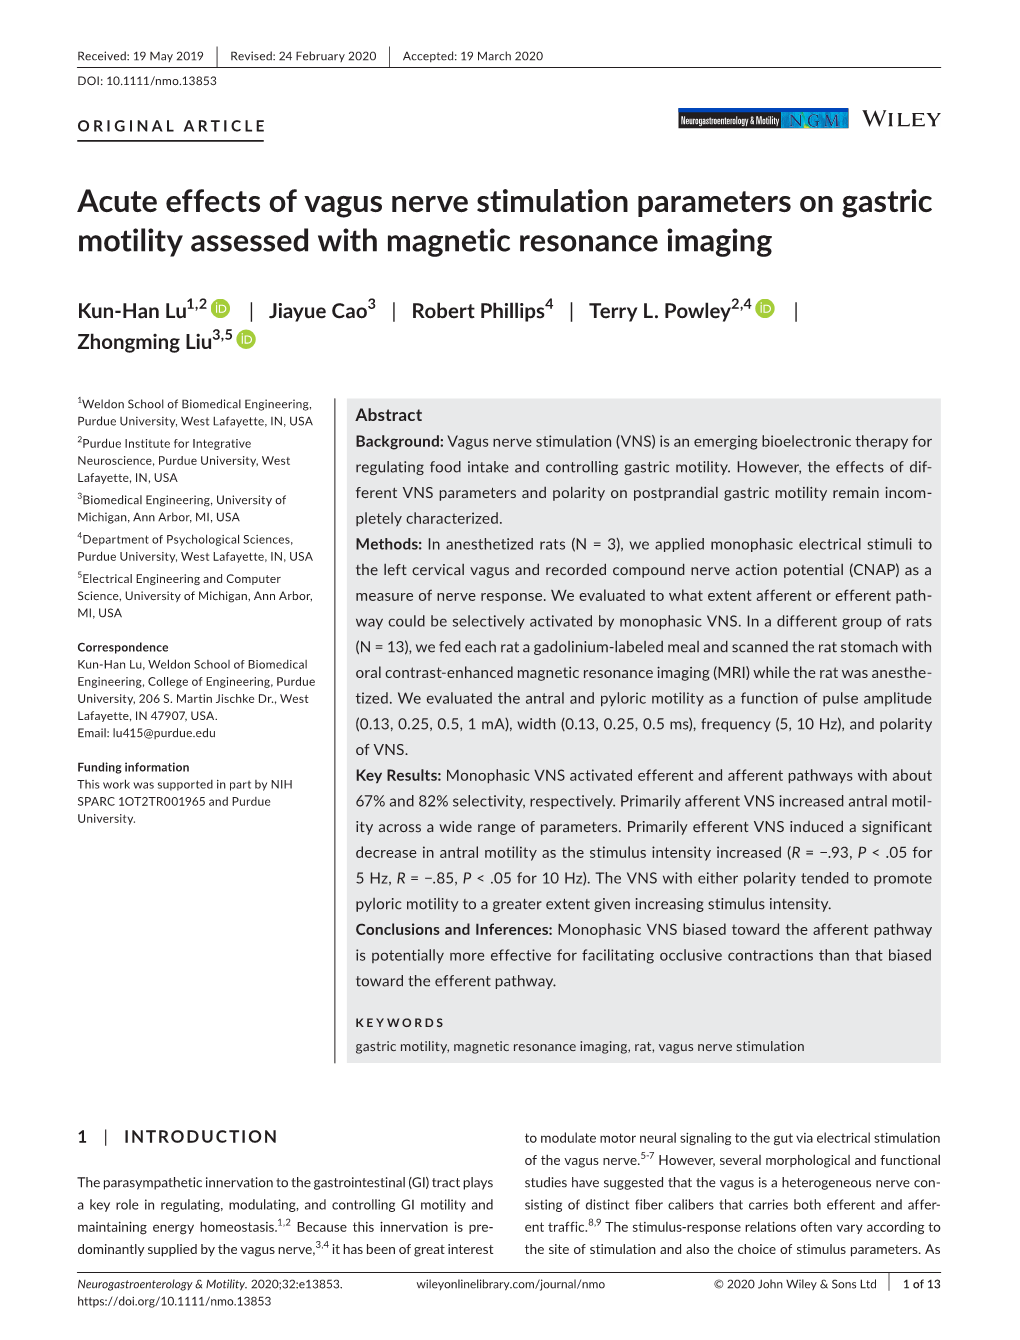 Acute Effects of Vagus Nerve Stimulation Parameters on Gastric Motility Assessed with Magnetic Resonance Imaging